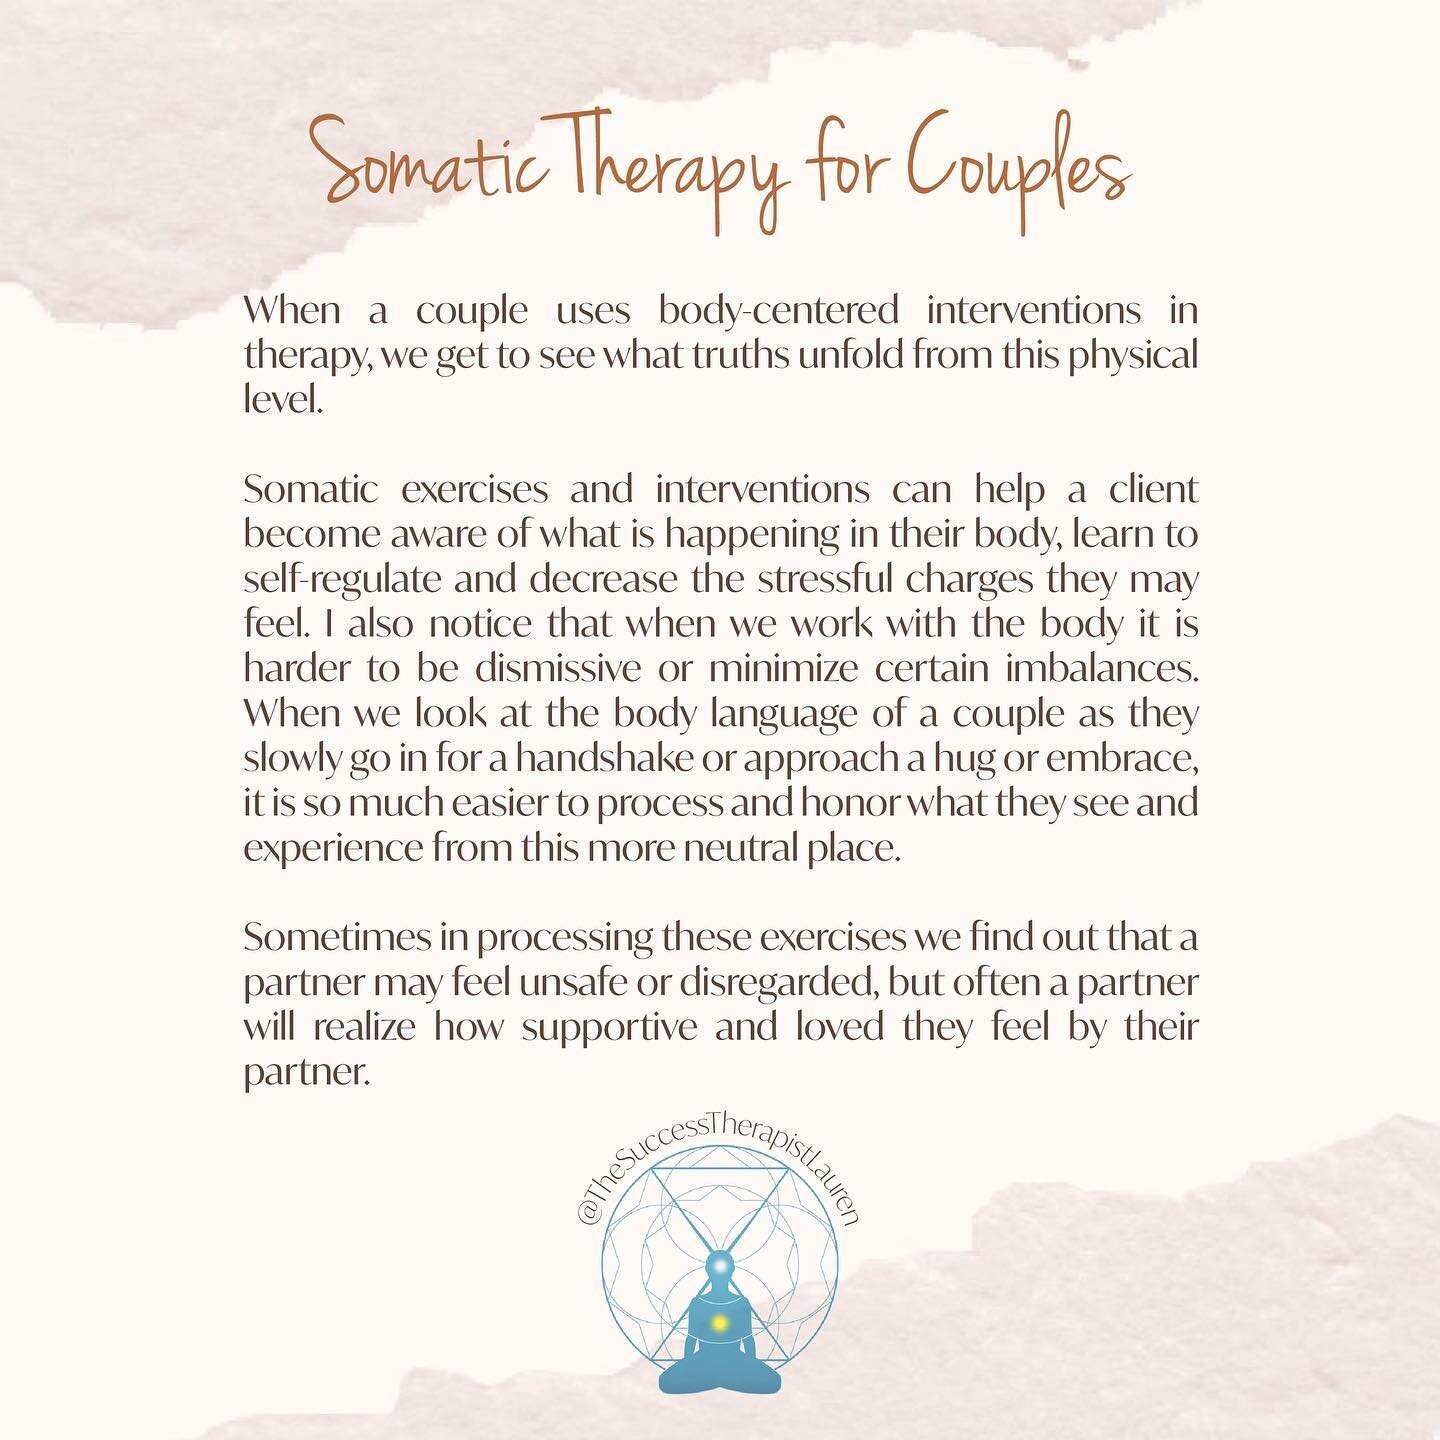 Click on link in bio for more information and for a free somatic couples therapy consultation. 

#couplestherapy #couplescounseling #somatic #somatictherapy #somaticpsychotherapy #psychotherapy #therapistsofinstagram #therapist #positivemindset